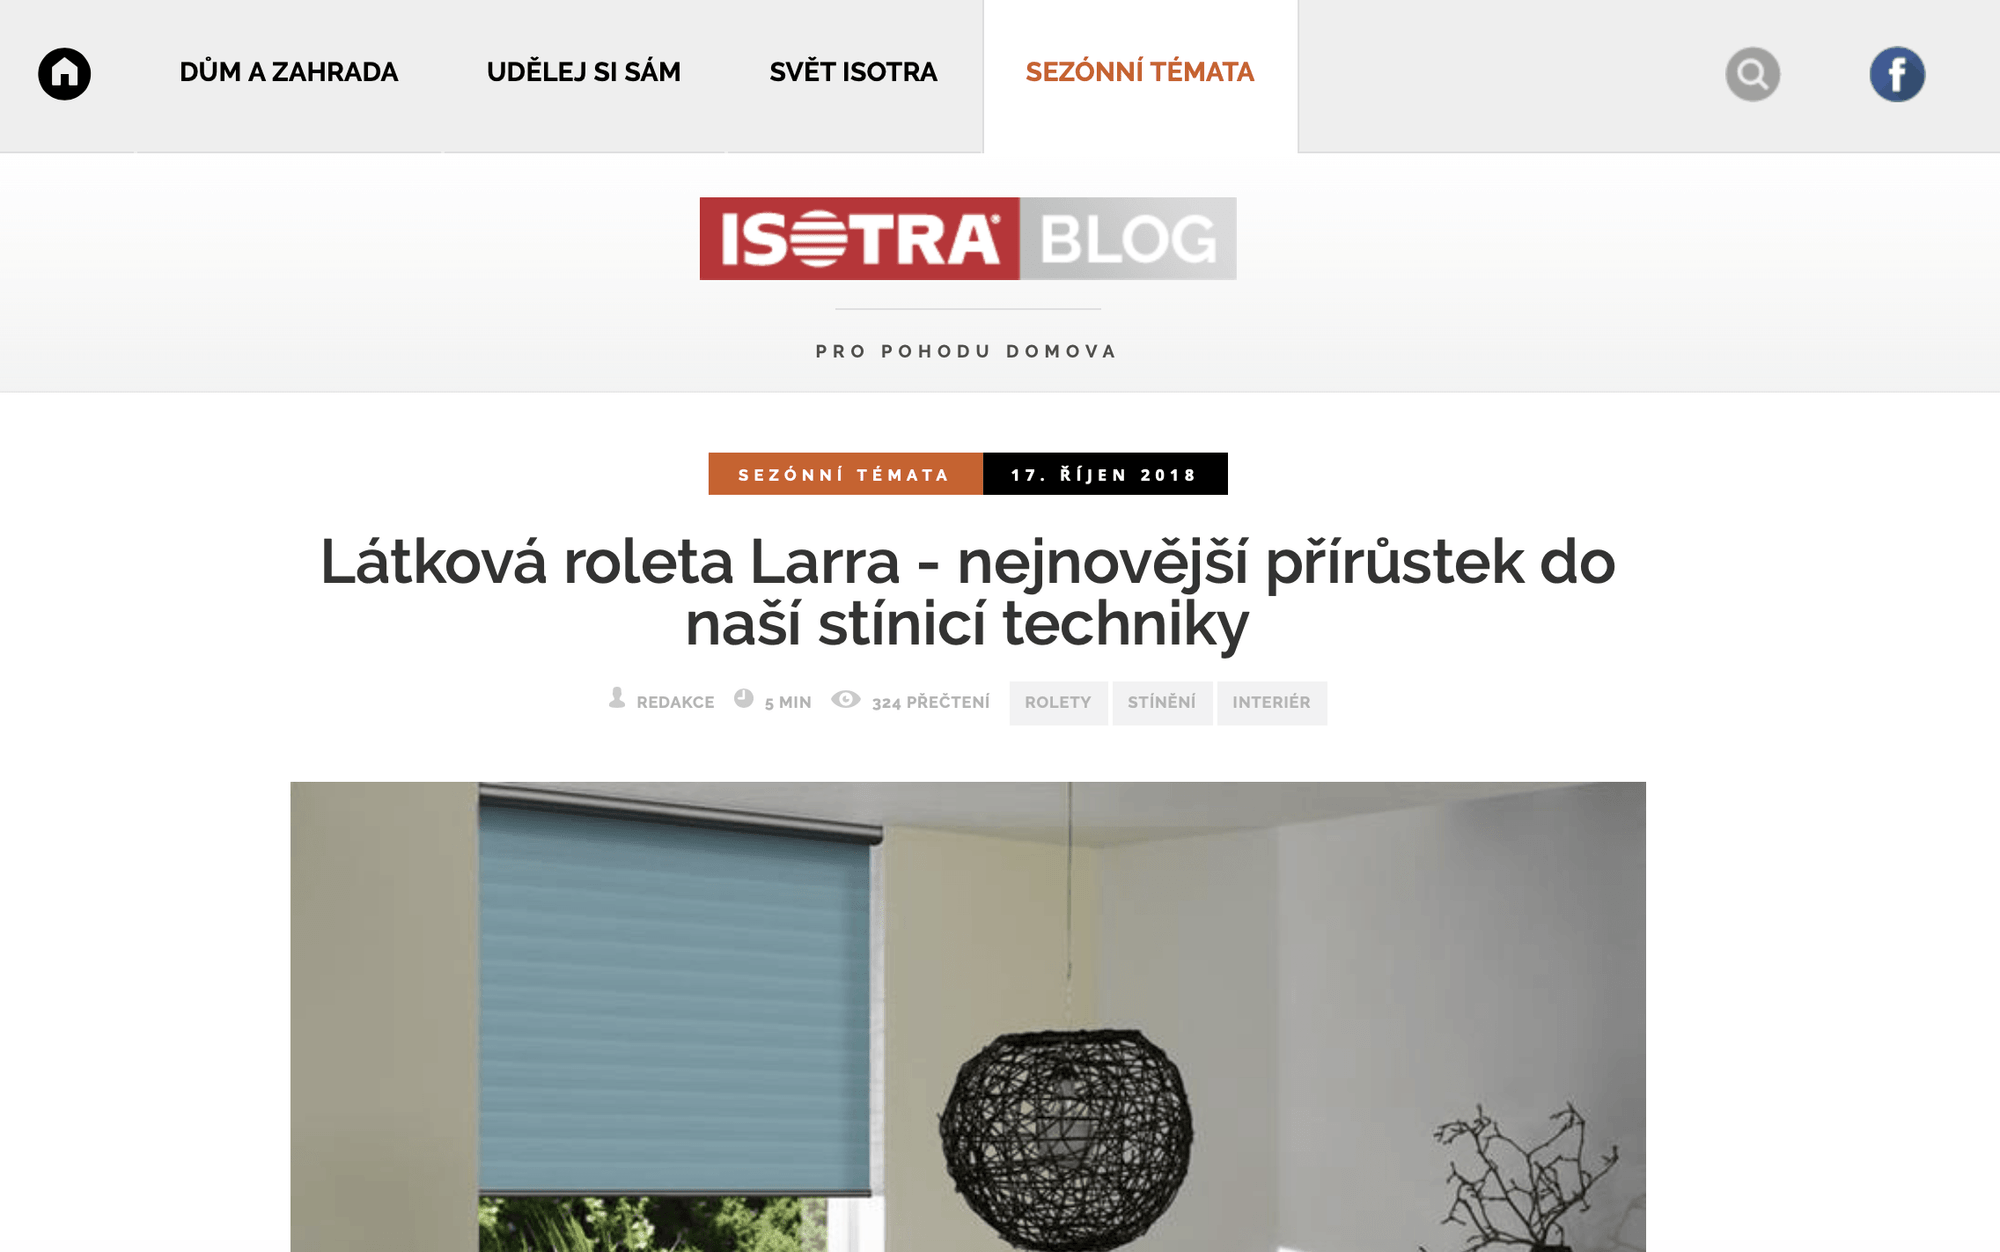 Miroslavo in Media: Press Release of ISOTRA a.s.